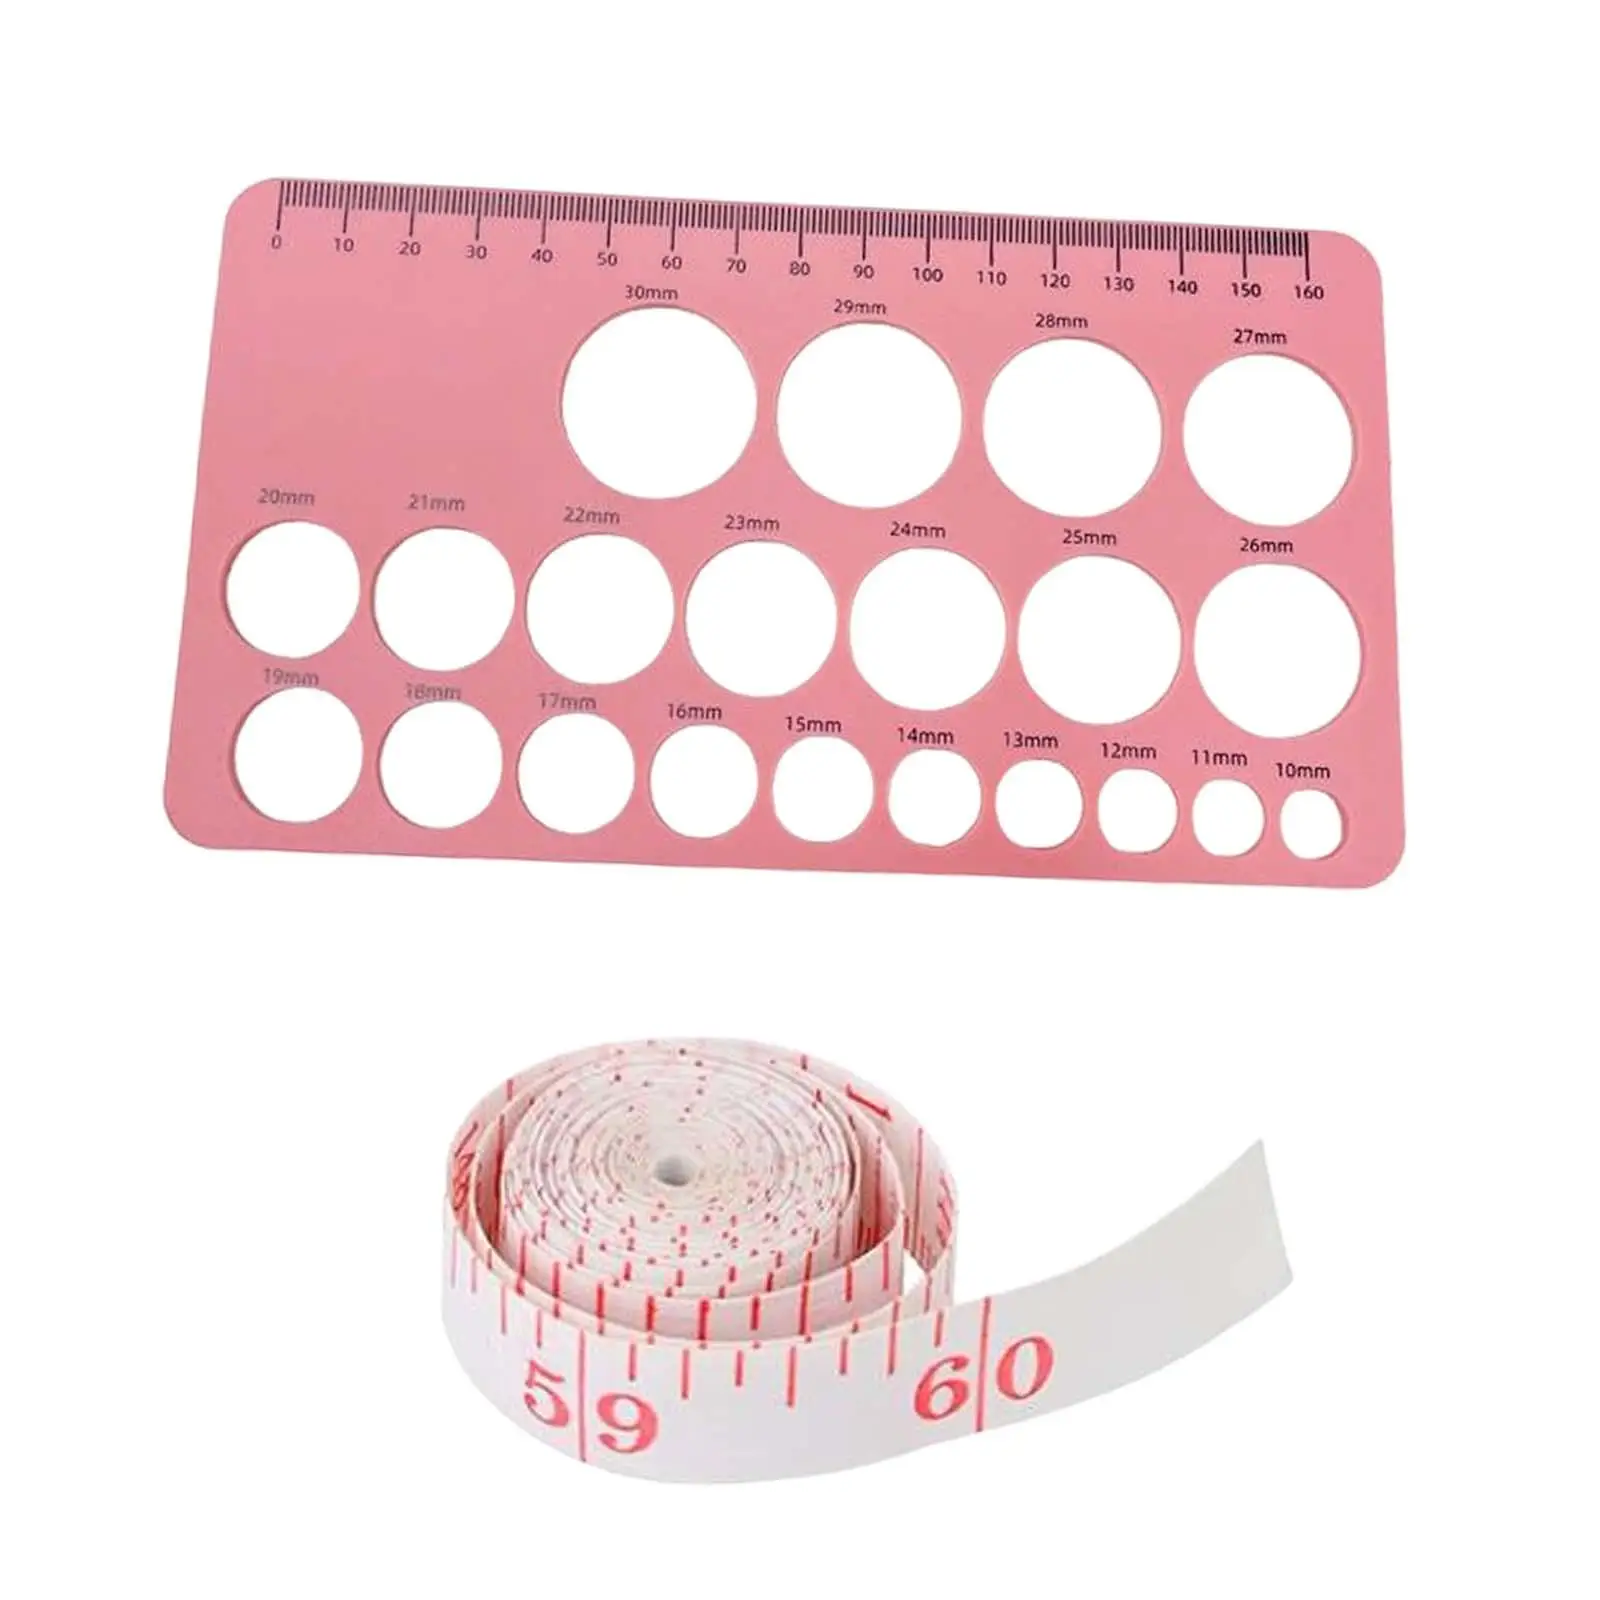 Nipple Rulers for Flange Sizing Measurement Tool Durable for Breast Pump Sizing Tool